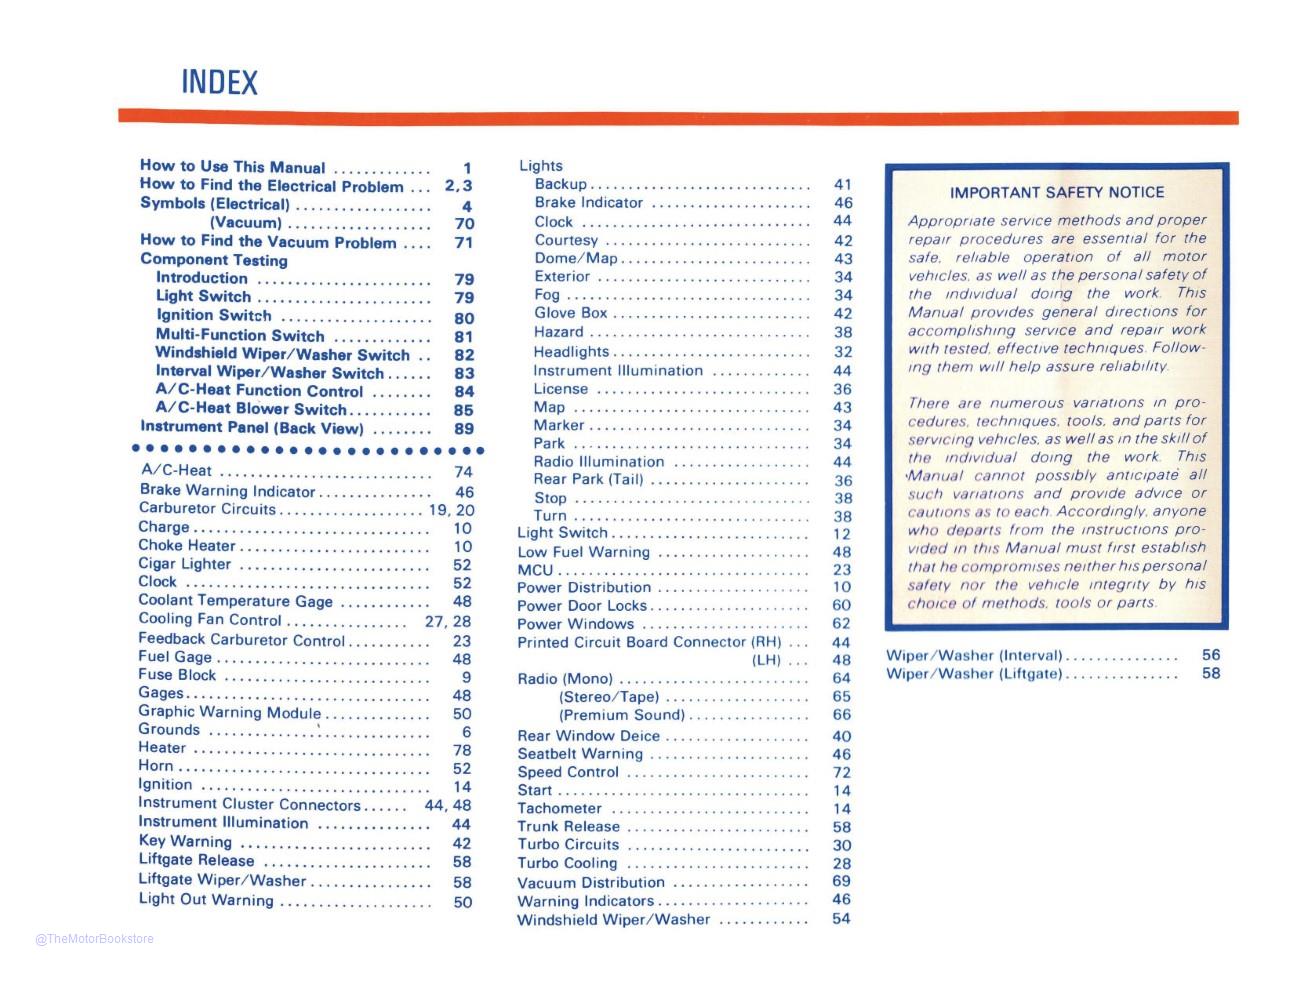 1982 Ford Mustang Capri Electrical Vacuum Troubleshooting Manual  - Table of Contents